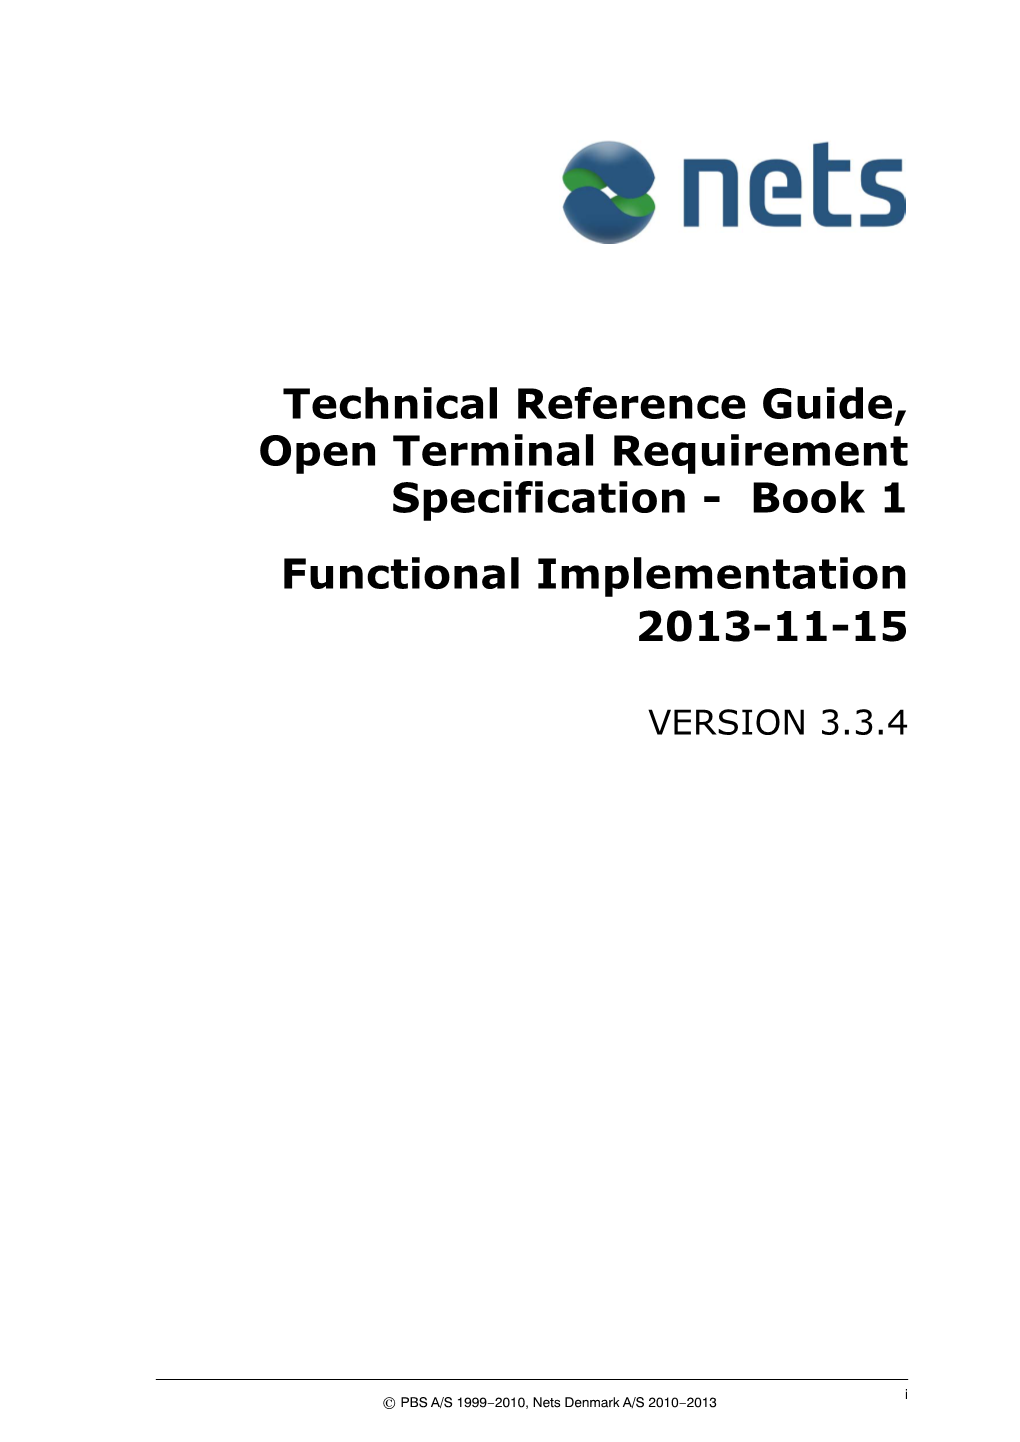 Technical Reference Guide, Open Terminal Requirement Specification - Book 1 Functional Implementation 2013-11-15